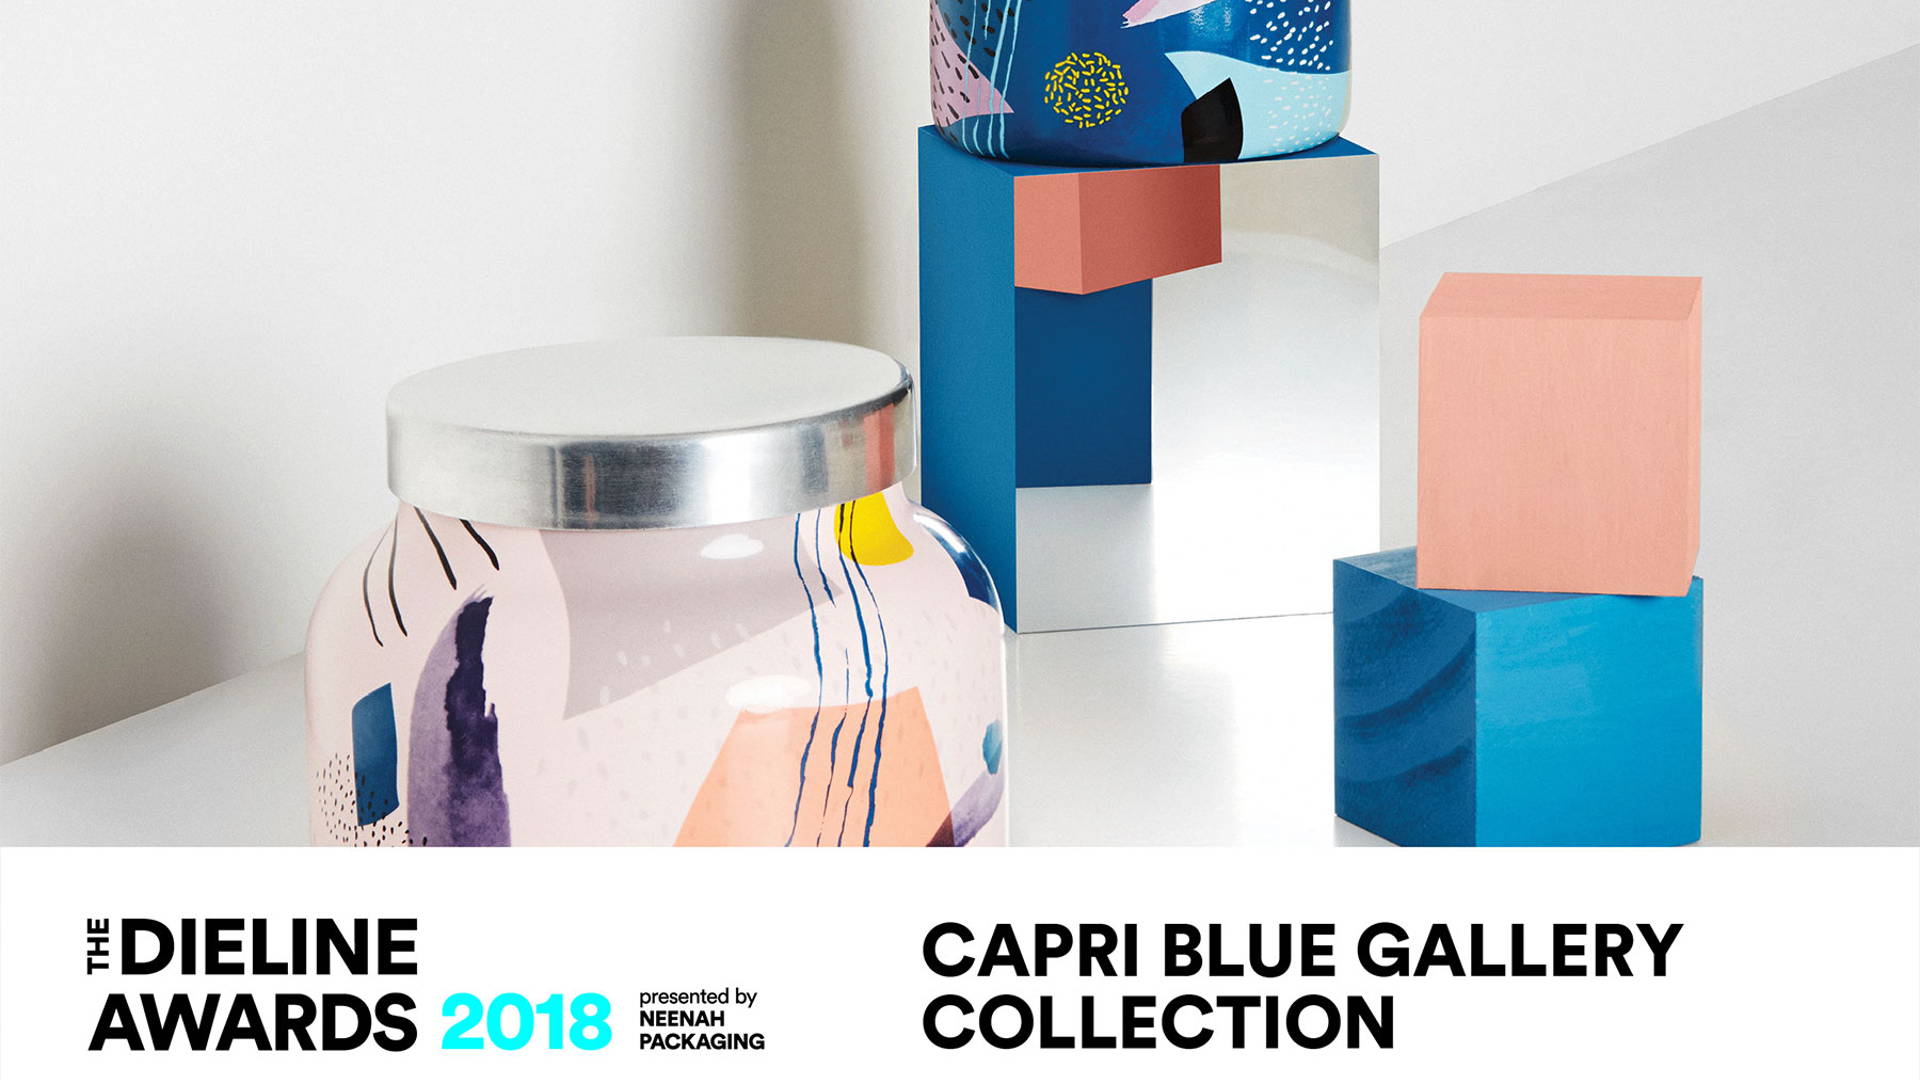 Featured image for The Dieline Awards 2018 Outstanding Achievements: Capri Blue Gallery Collection